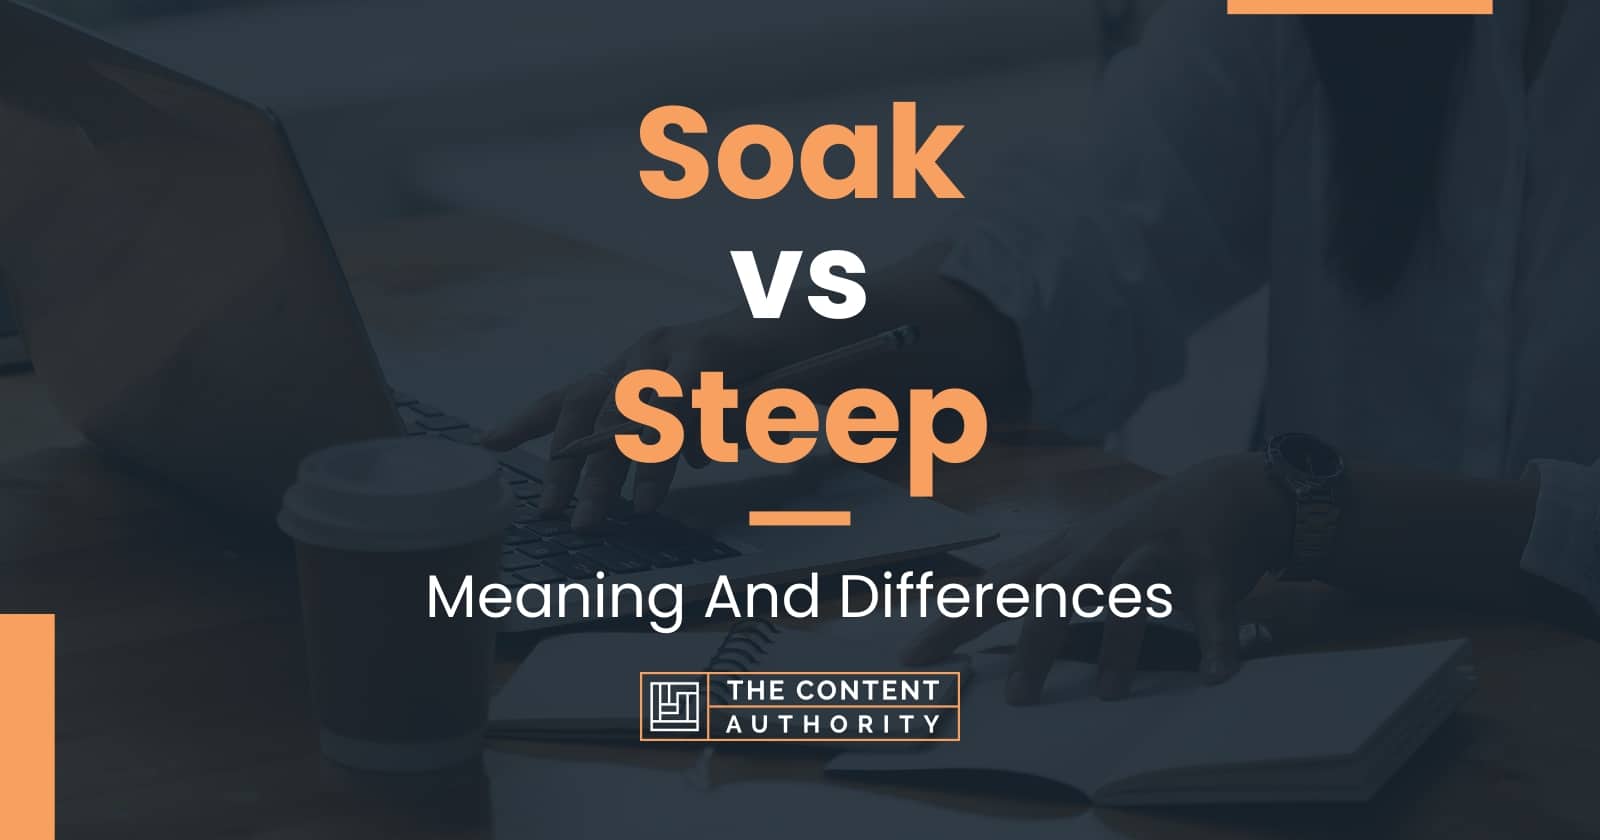 Soak vs Steep: Meaning And Differences